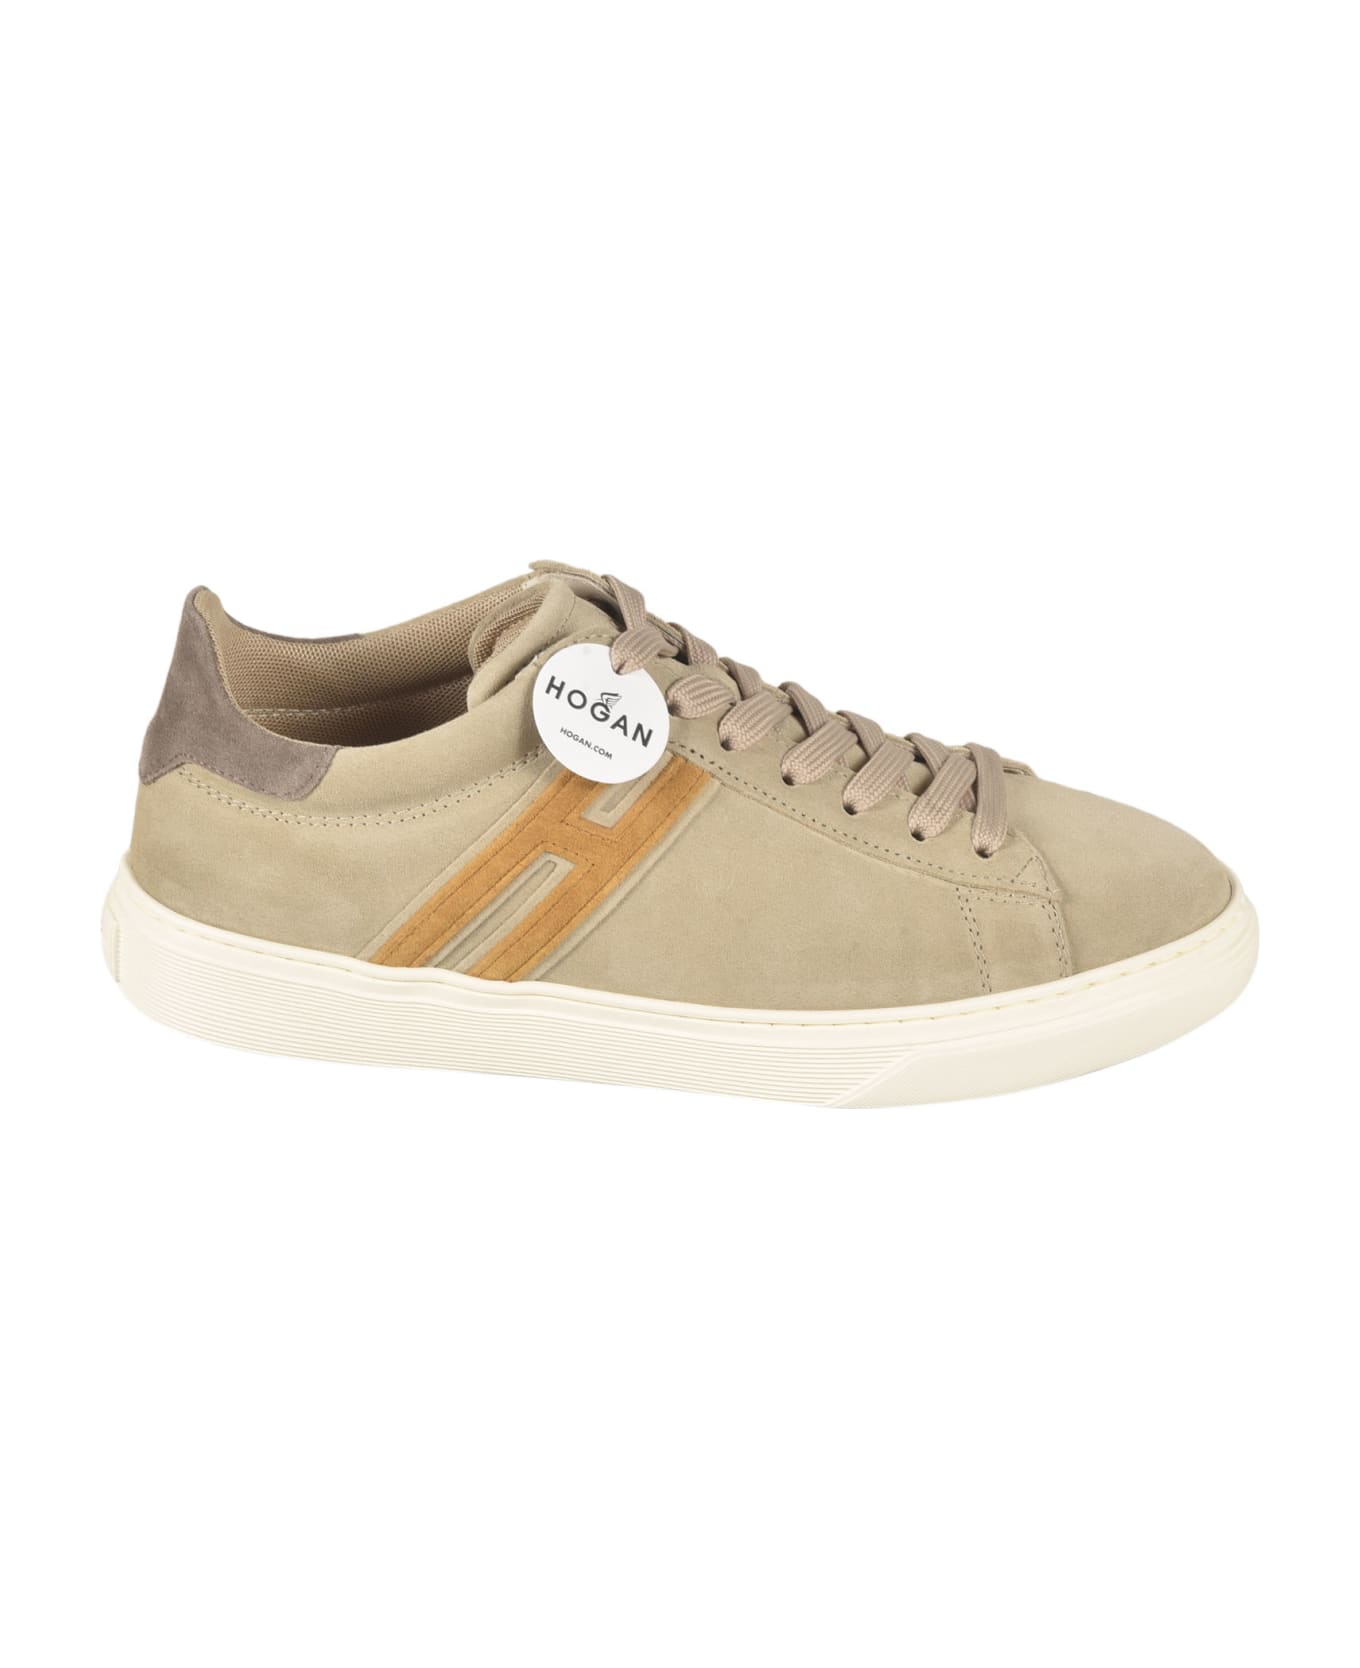 Hogan H365 Canaletto Sneakers - Chocolate